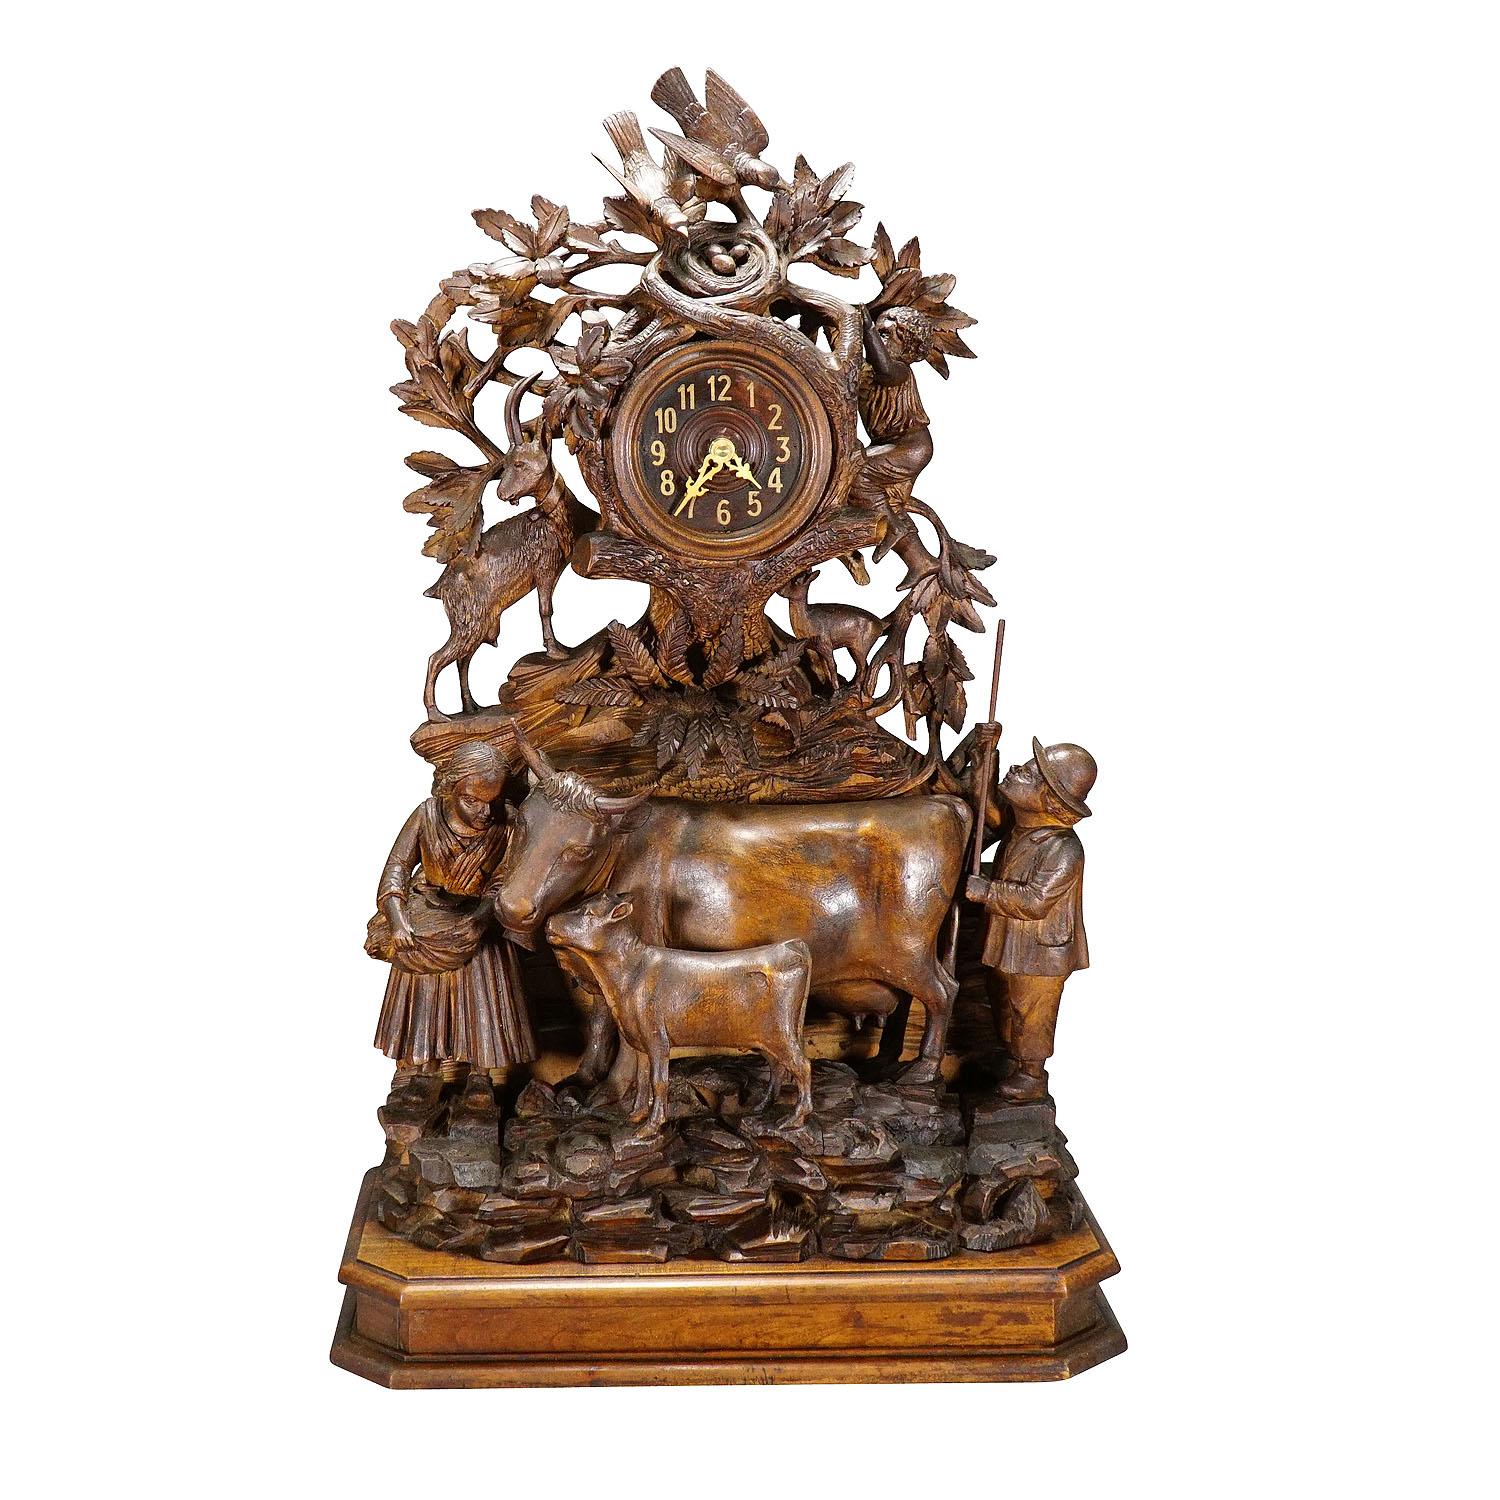 Antique Mantel Clock with Herdsman Family, Goats and Cattle

A Black Forest wooden carved mantel clock with a lovely herdsman family with their goats and cattles. A masterpiece of woodcarving which brightens up any chimney piece. The clockwork is